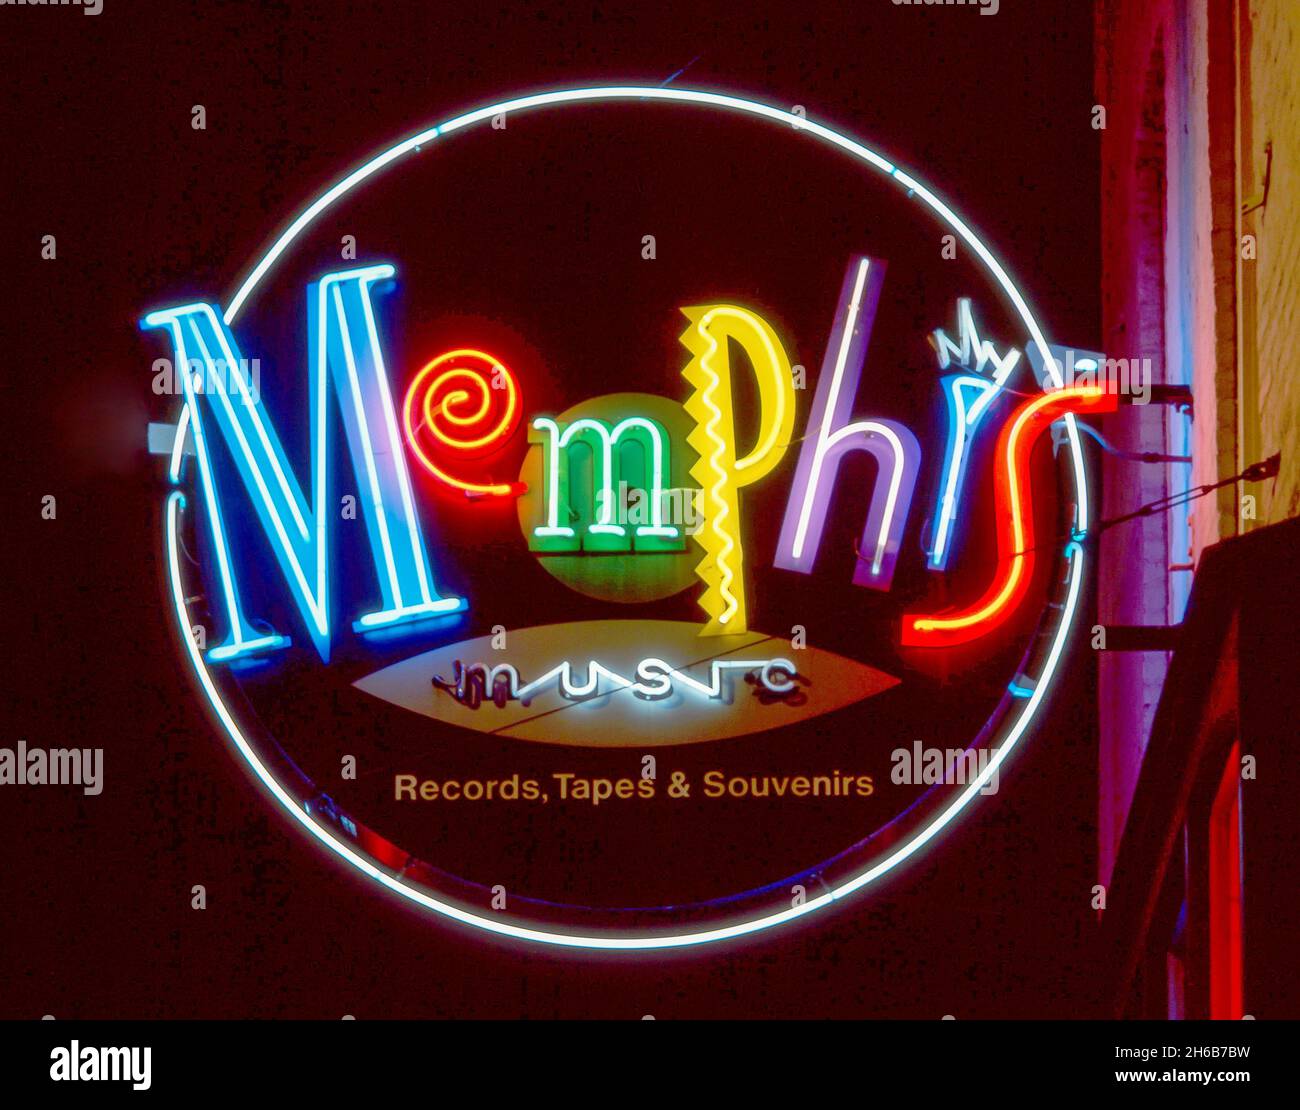 Memphis music sign at night on Beale Street, Beale Street District, Memphis, Tennessee, United States of America Stock Photo